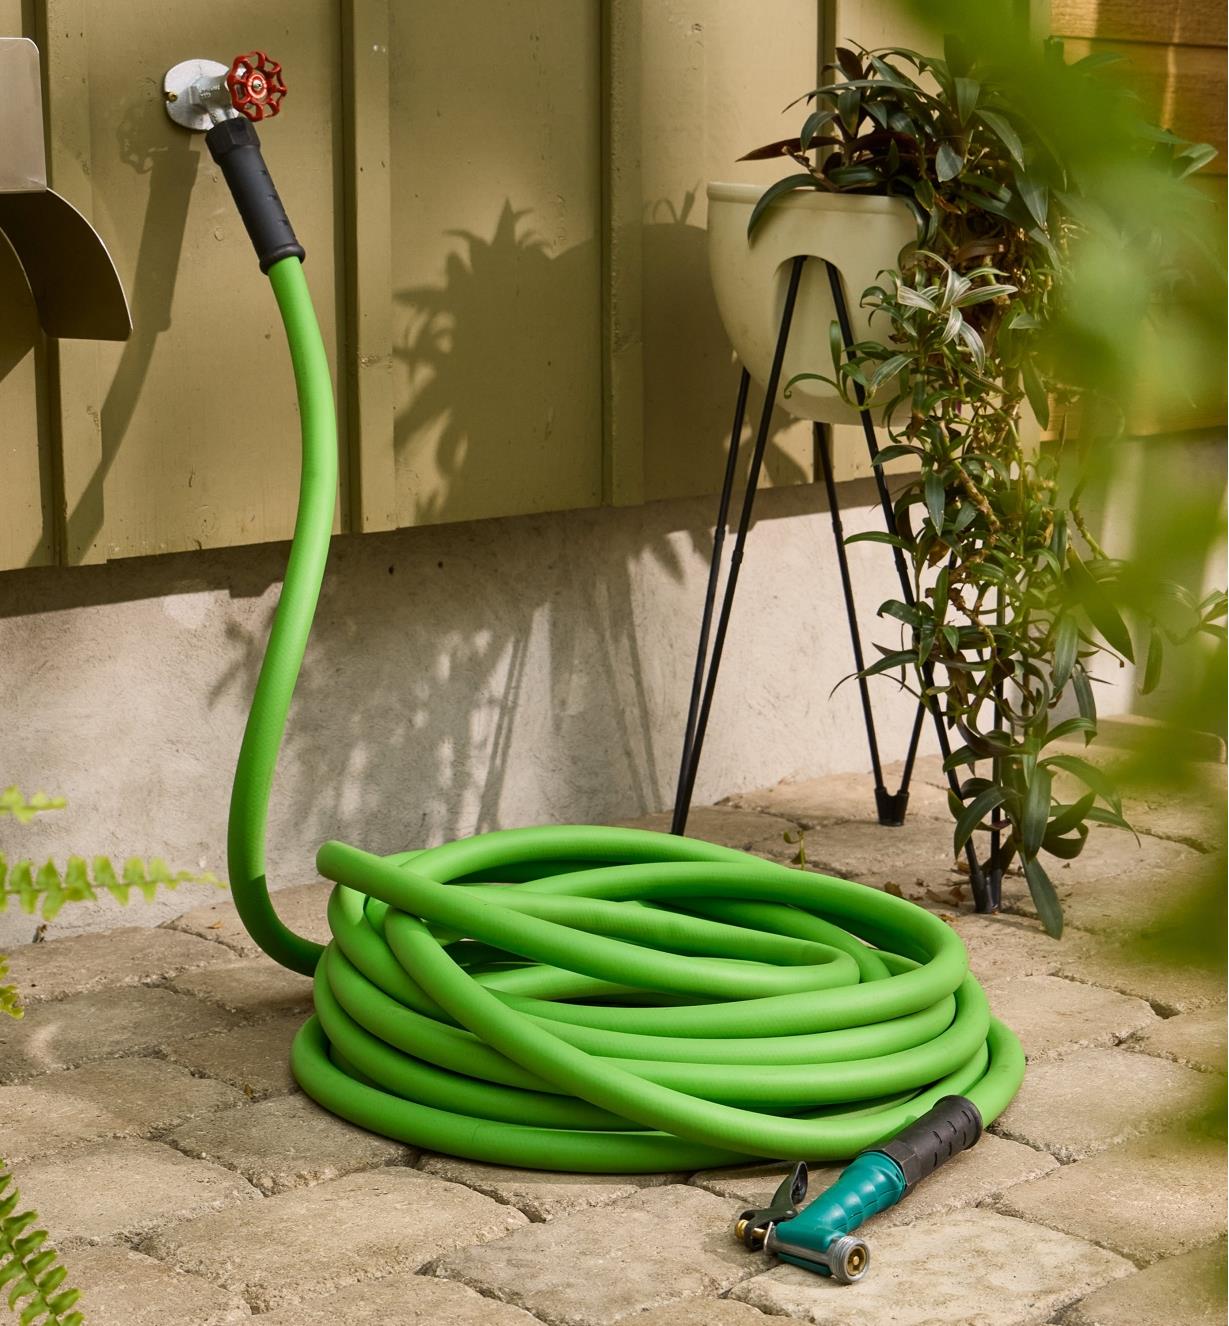 3/4" garden hose lies on the ground while connected to an outdoor tap